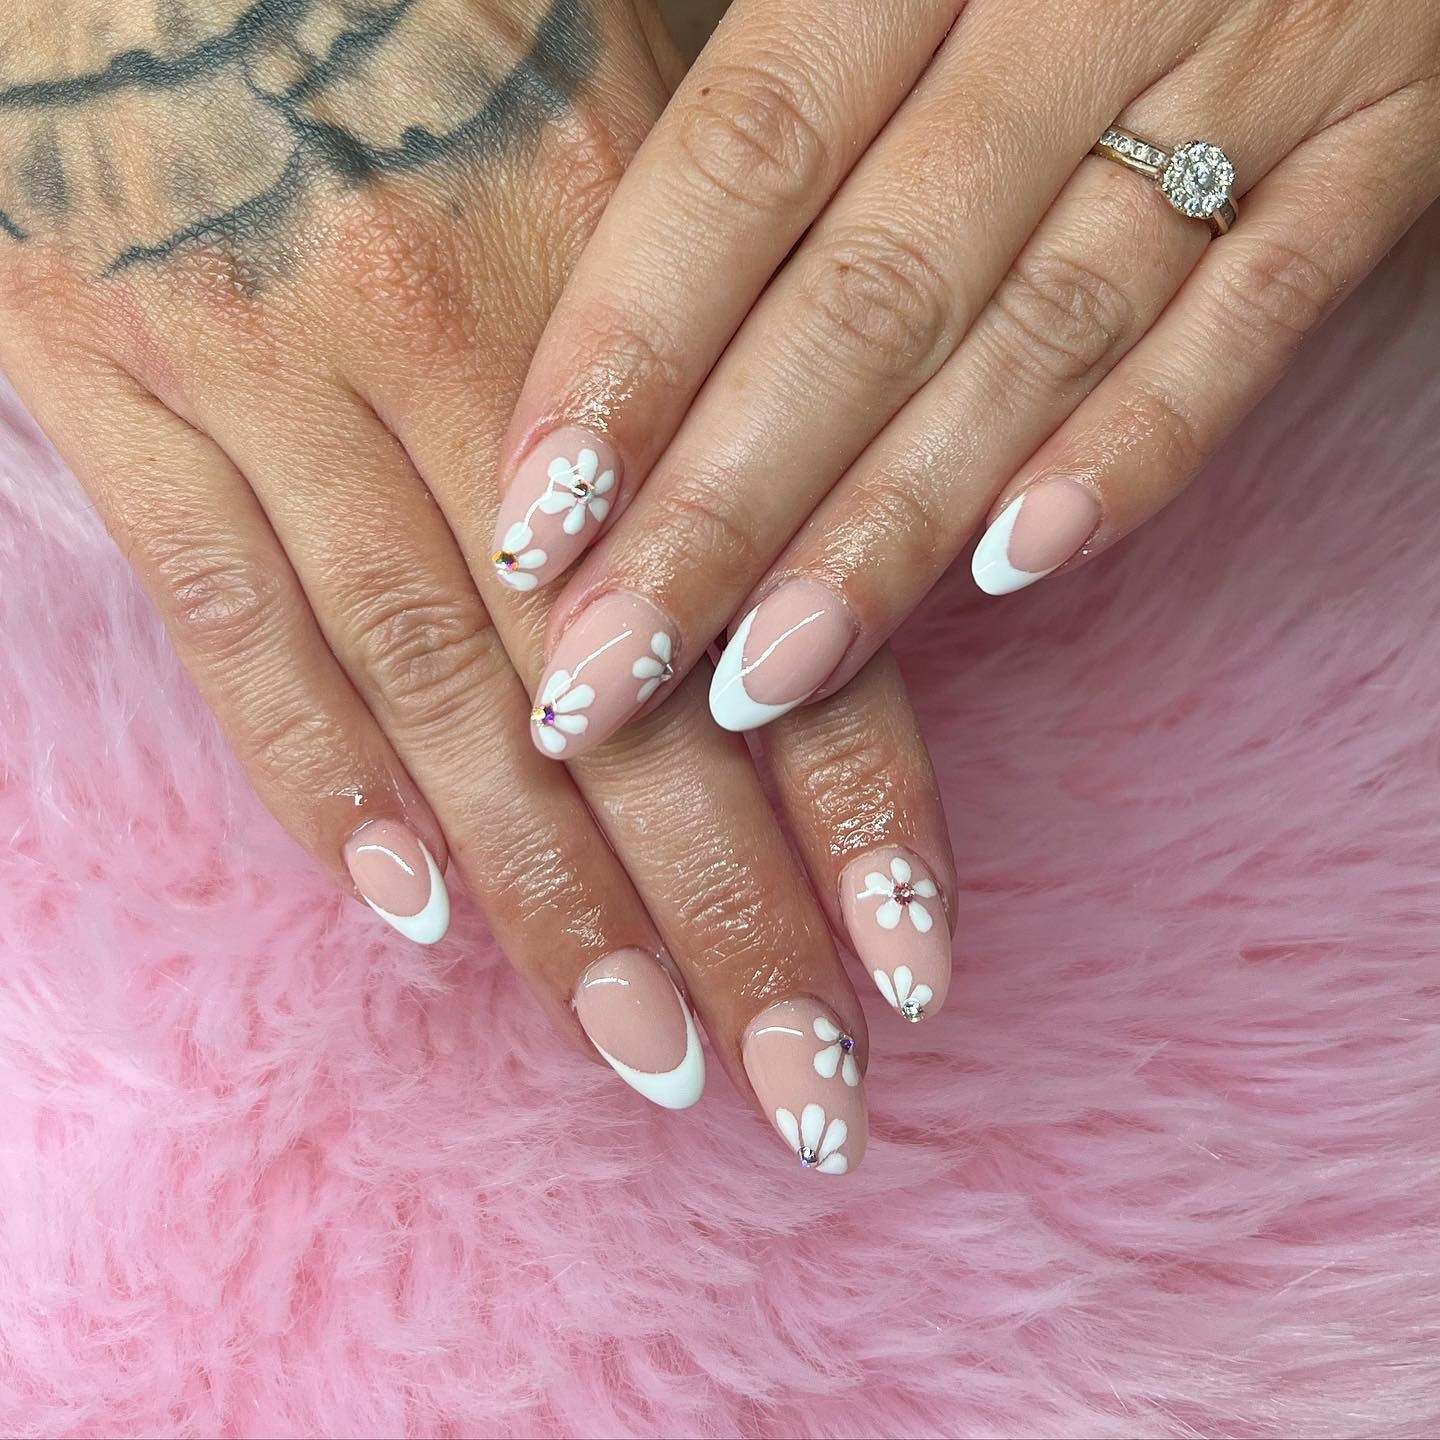 Almond shape nails are perfect to wear a French mani and we all know it. Why don't you add some energy to your mani with some daisies?